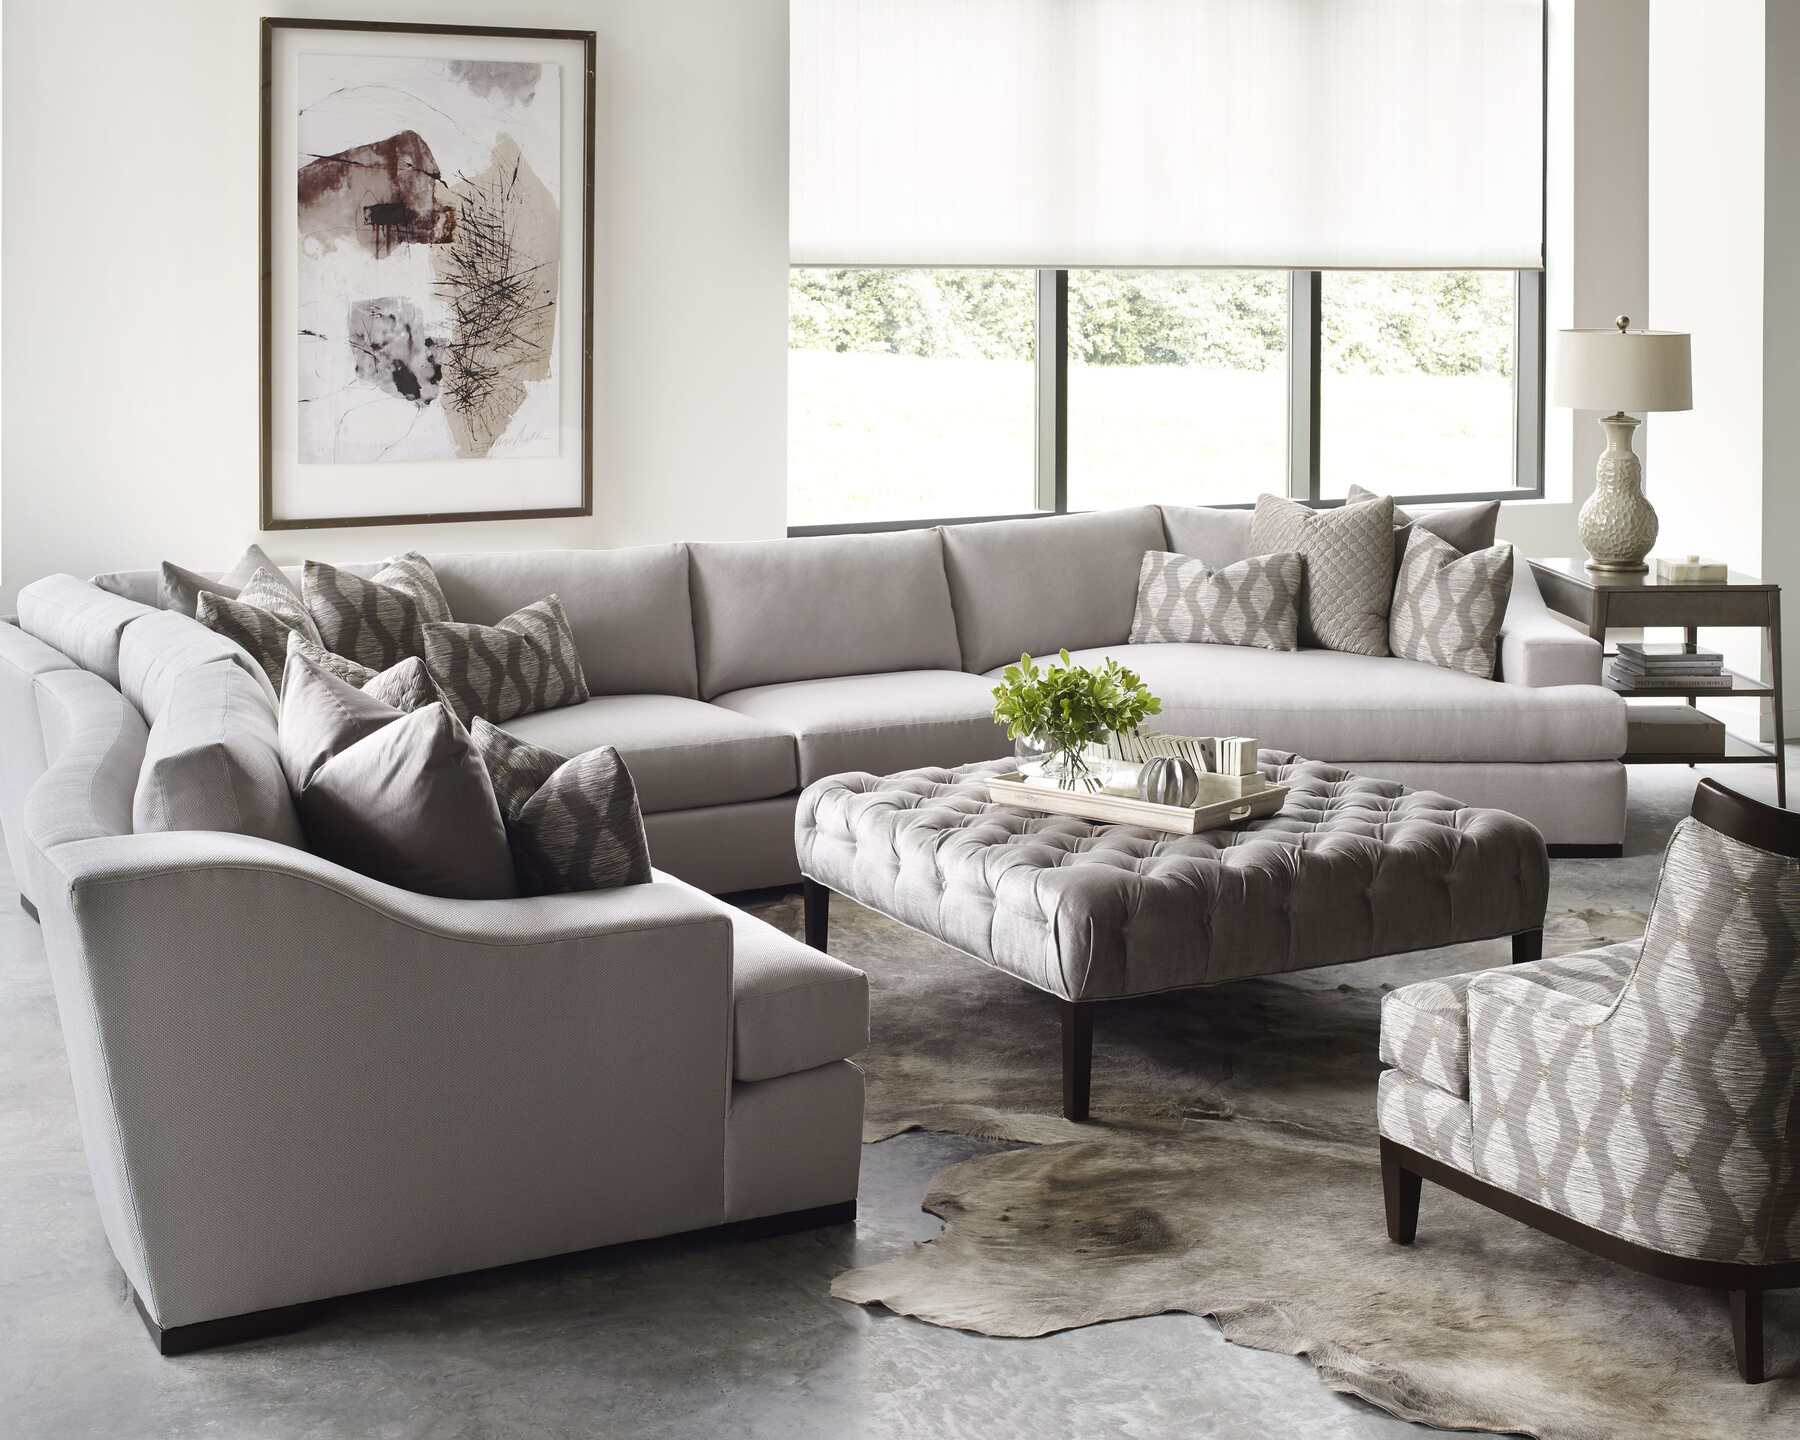 Interior of a living room featuring a sectional couch and ottoman